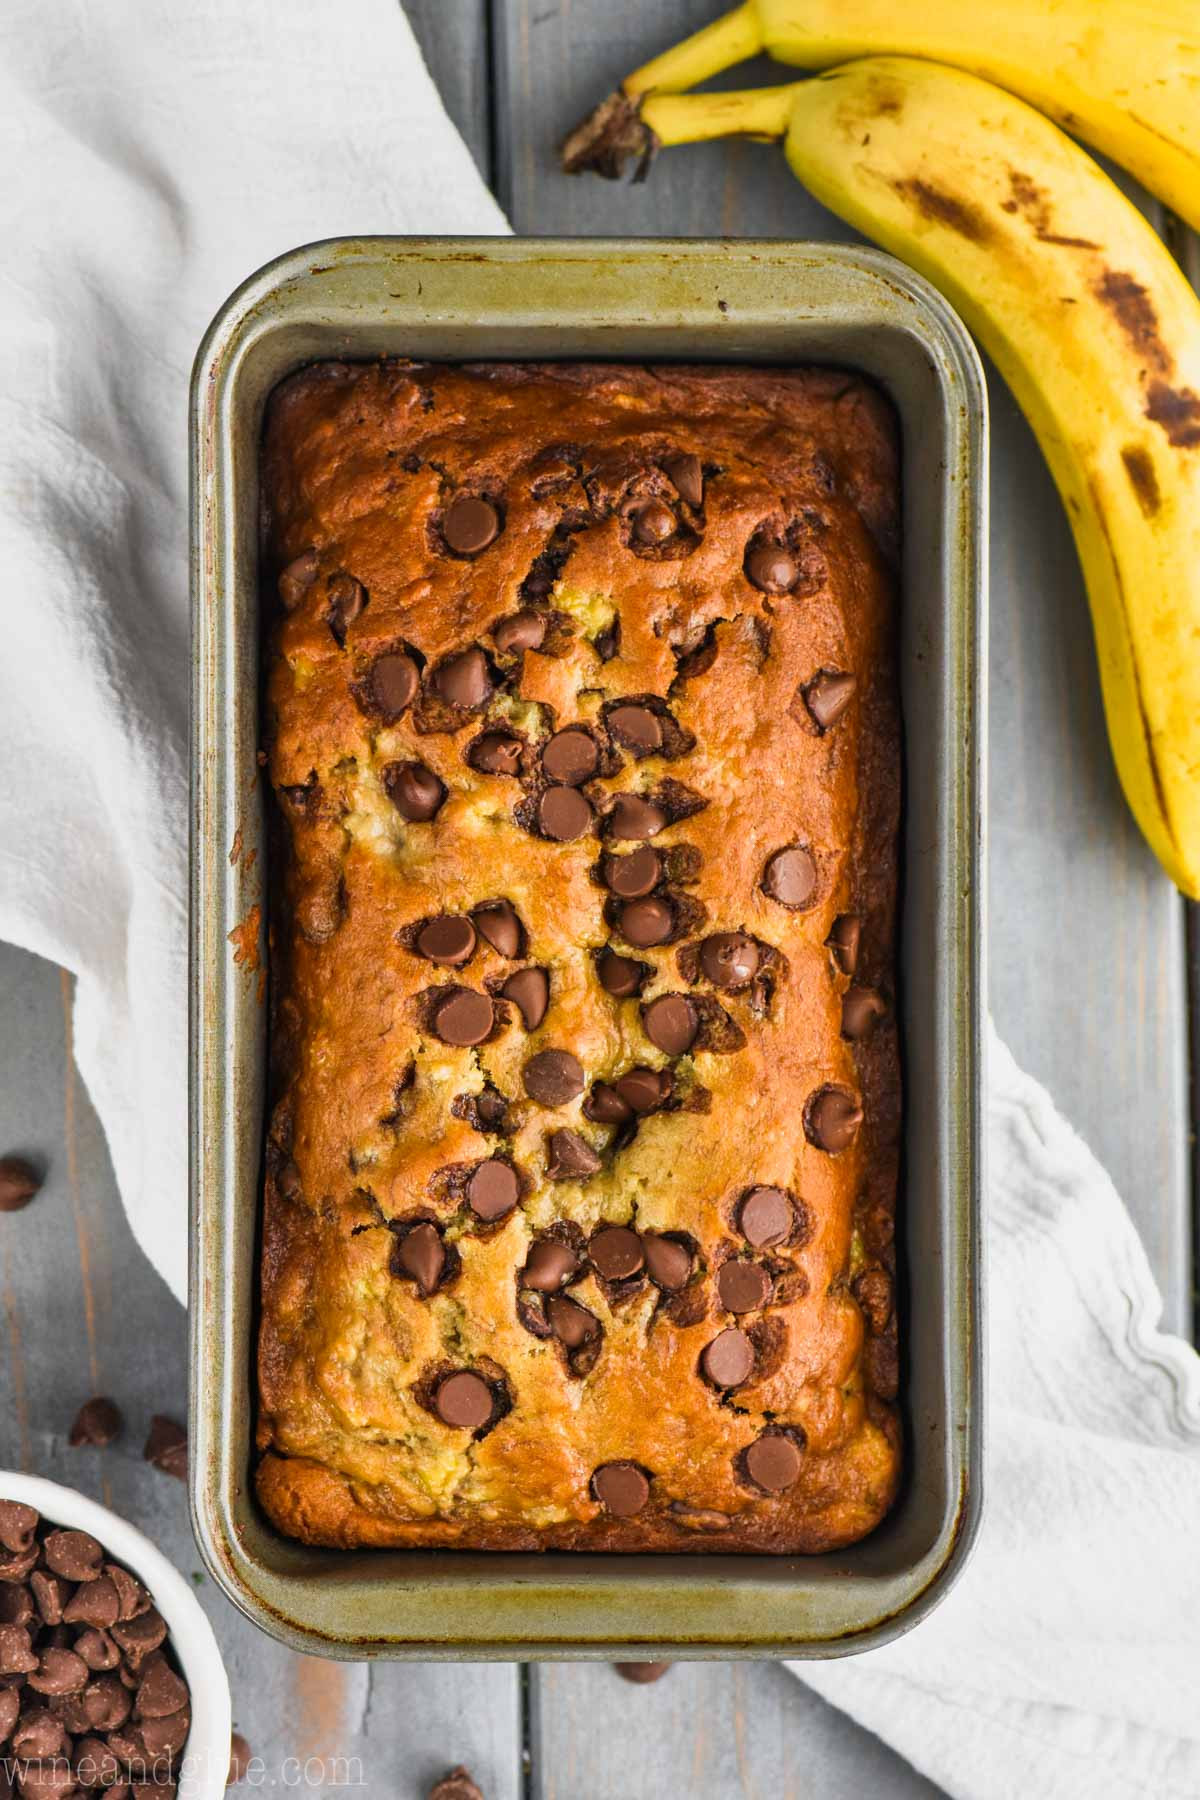 Best Chocolate Chip Banana Bread
 The Best Chocolate Chip Banana Bread Recipe Wine & Glue